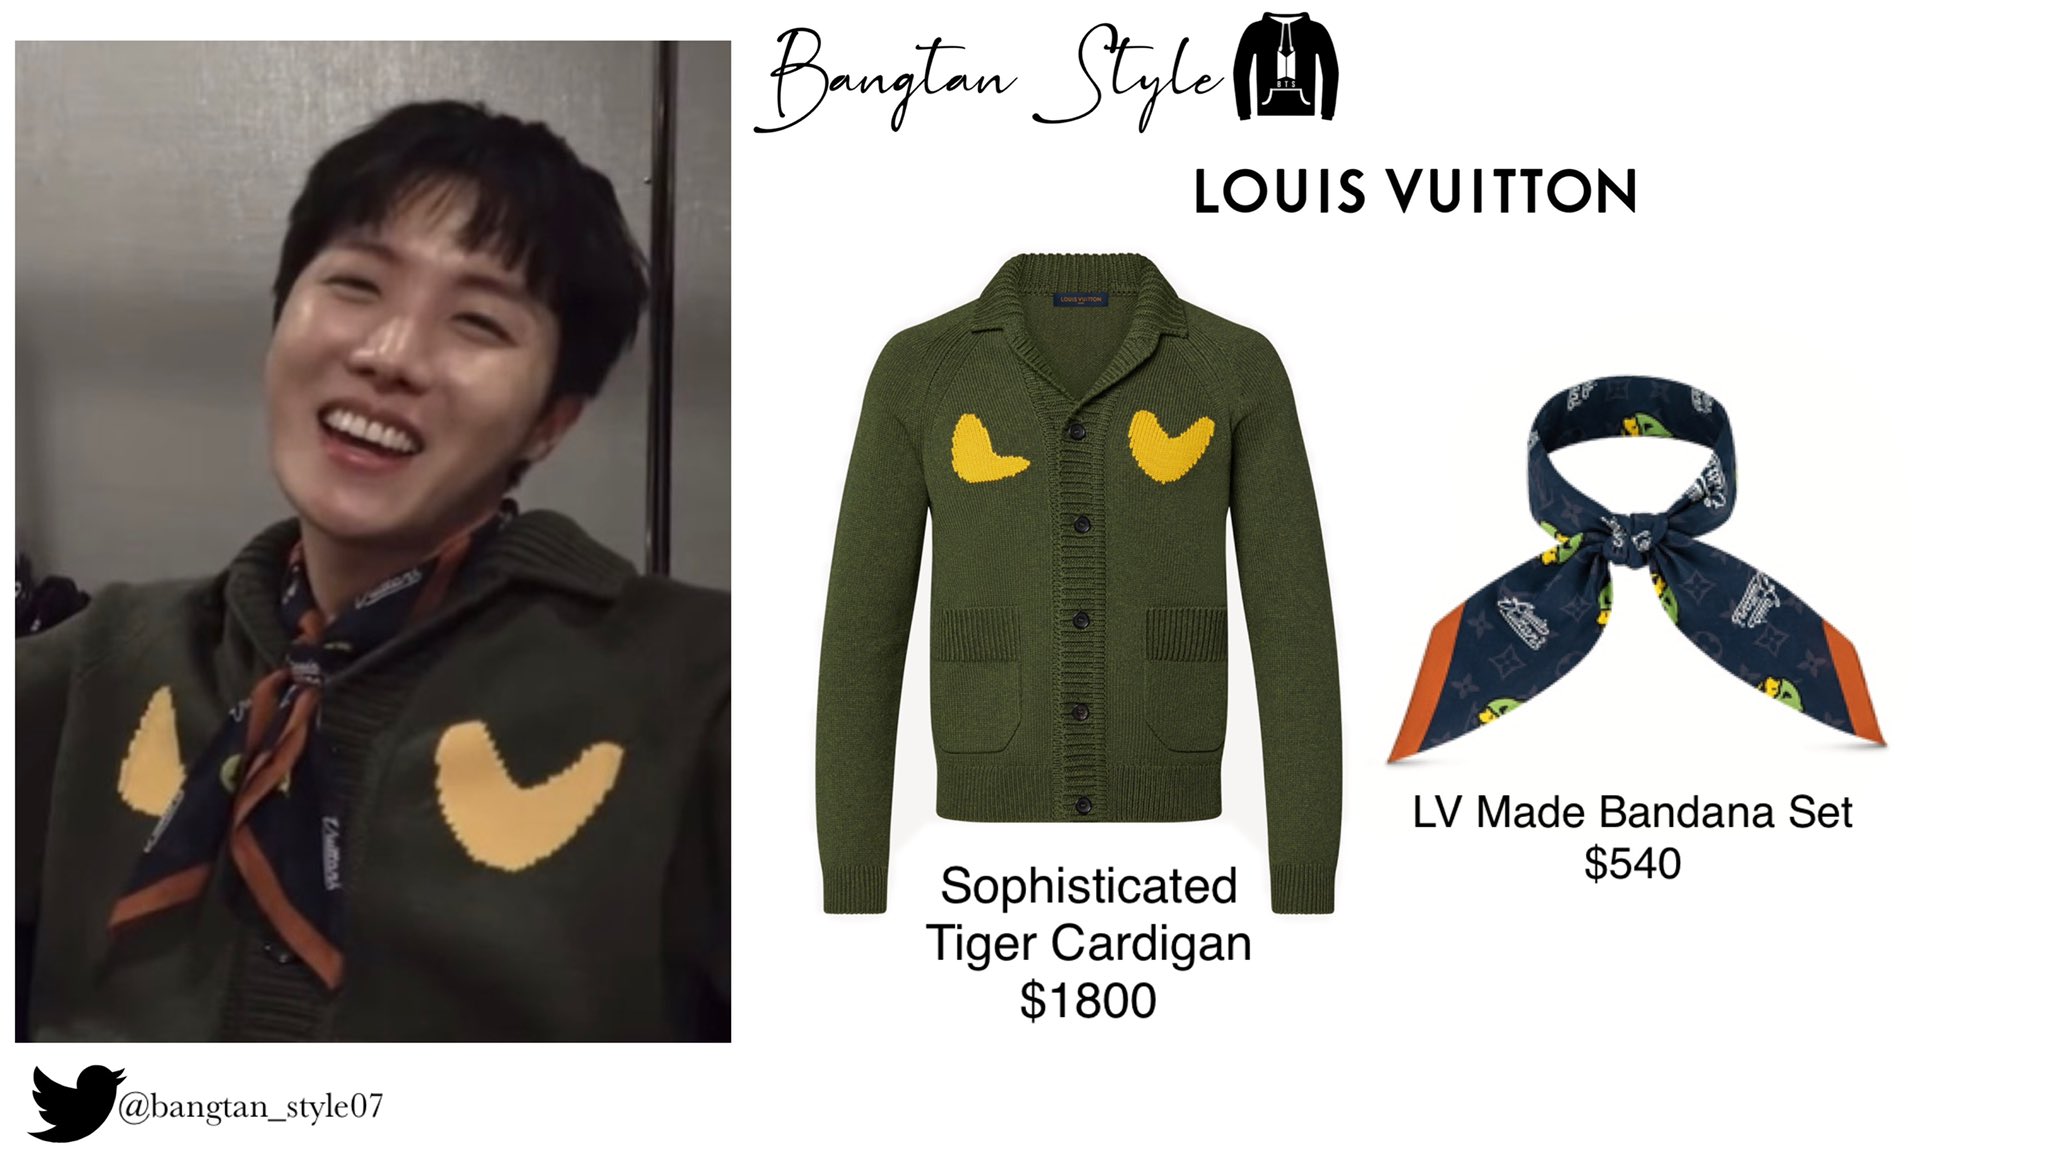 Louis Vuitton SOPHISTICATED TIGER CARDIGAN